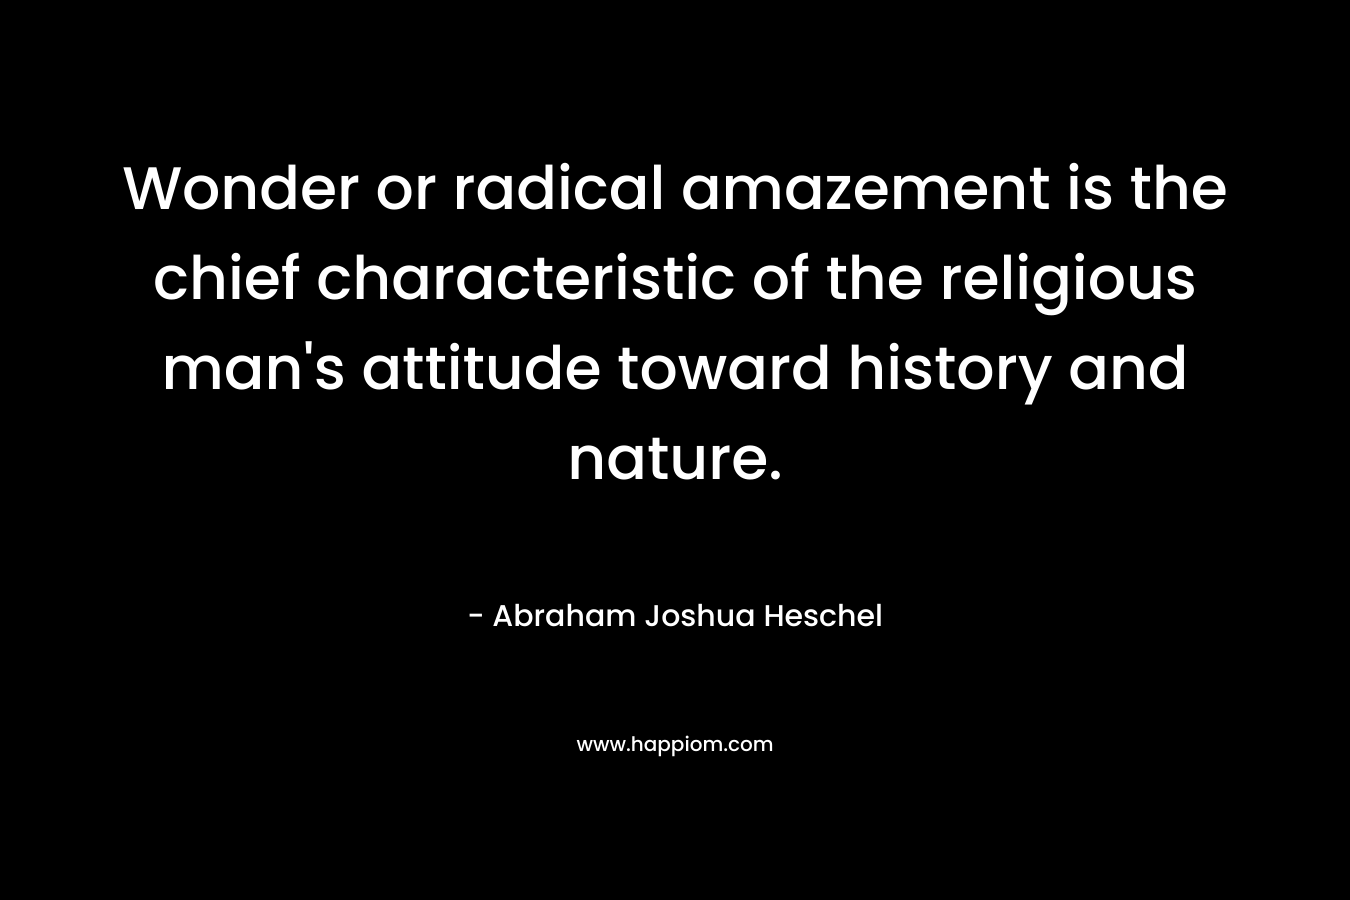 Wonder or radical amazement is the chief characteristic of the religious man’s attitude toward history and nature. – Abraham Joshua Heschel